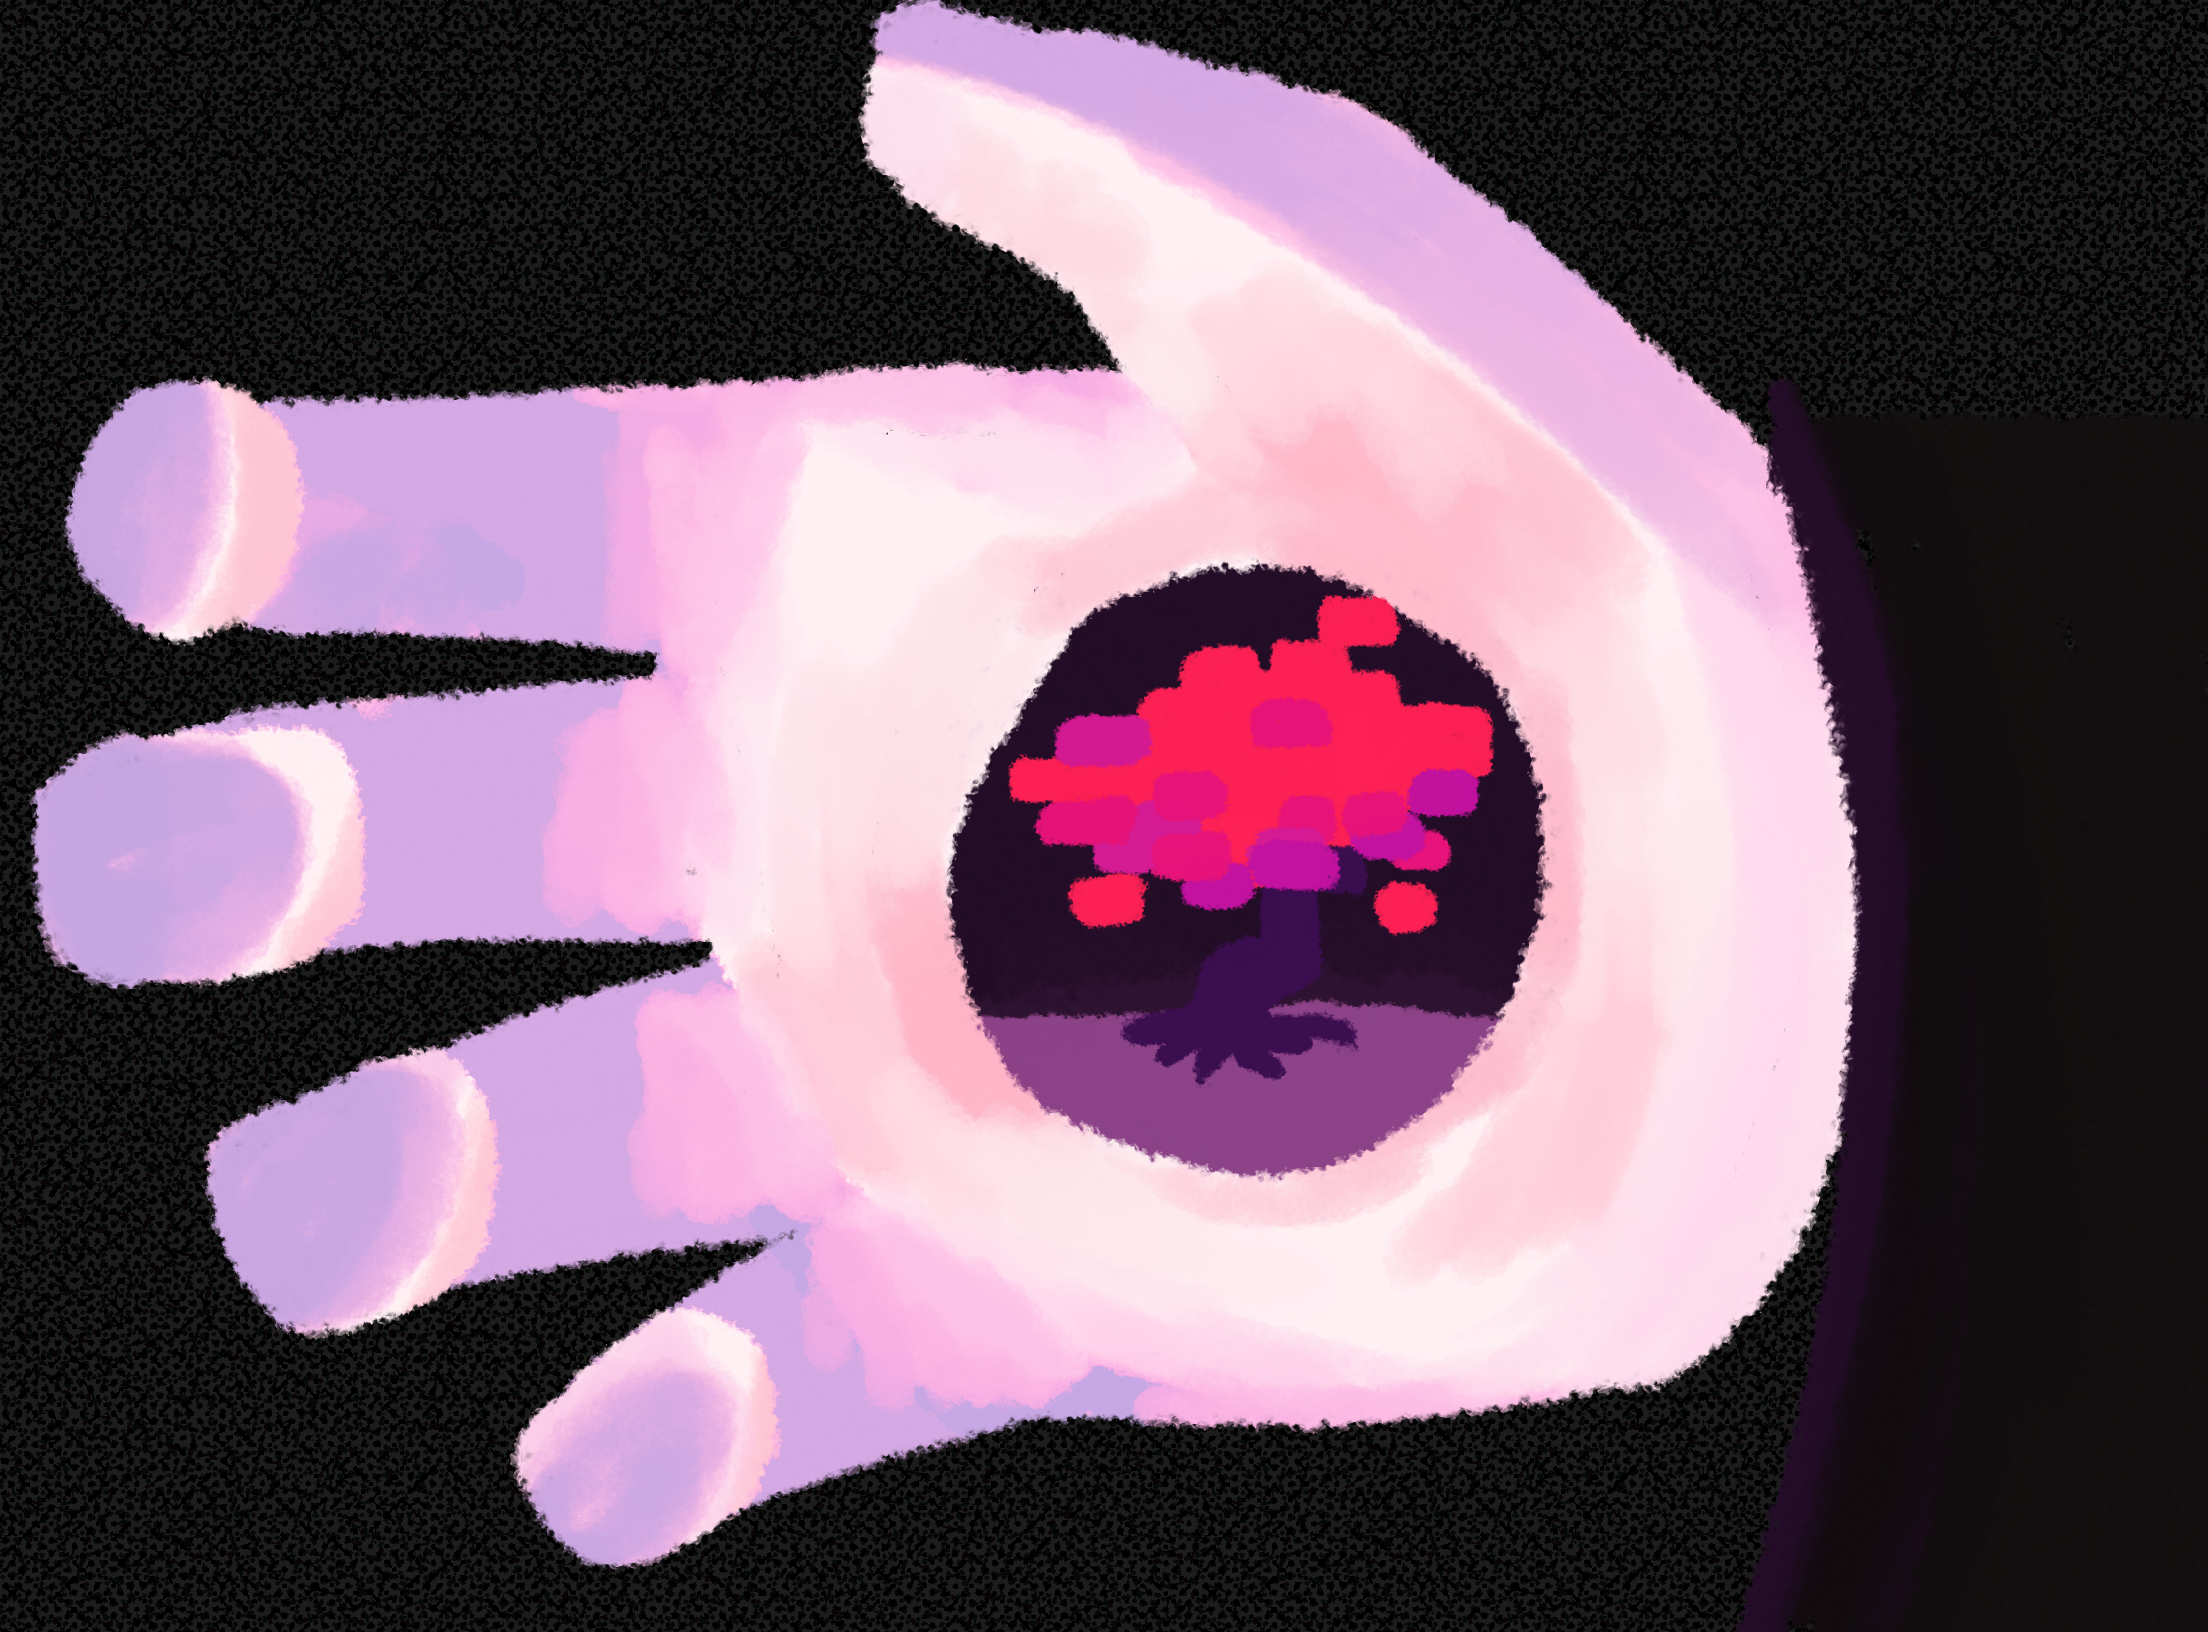 a drawing on a black background of gaster's hand, in the hole of his palm is the red blocky tree from secret maps in deltarune